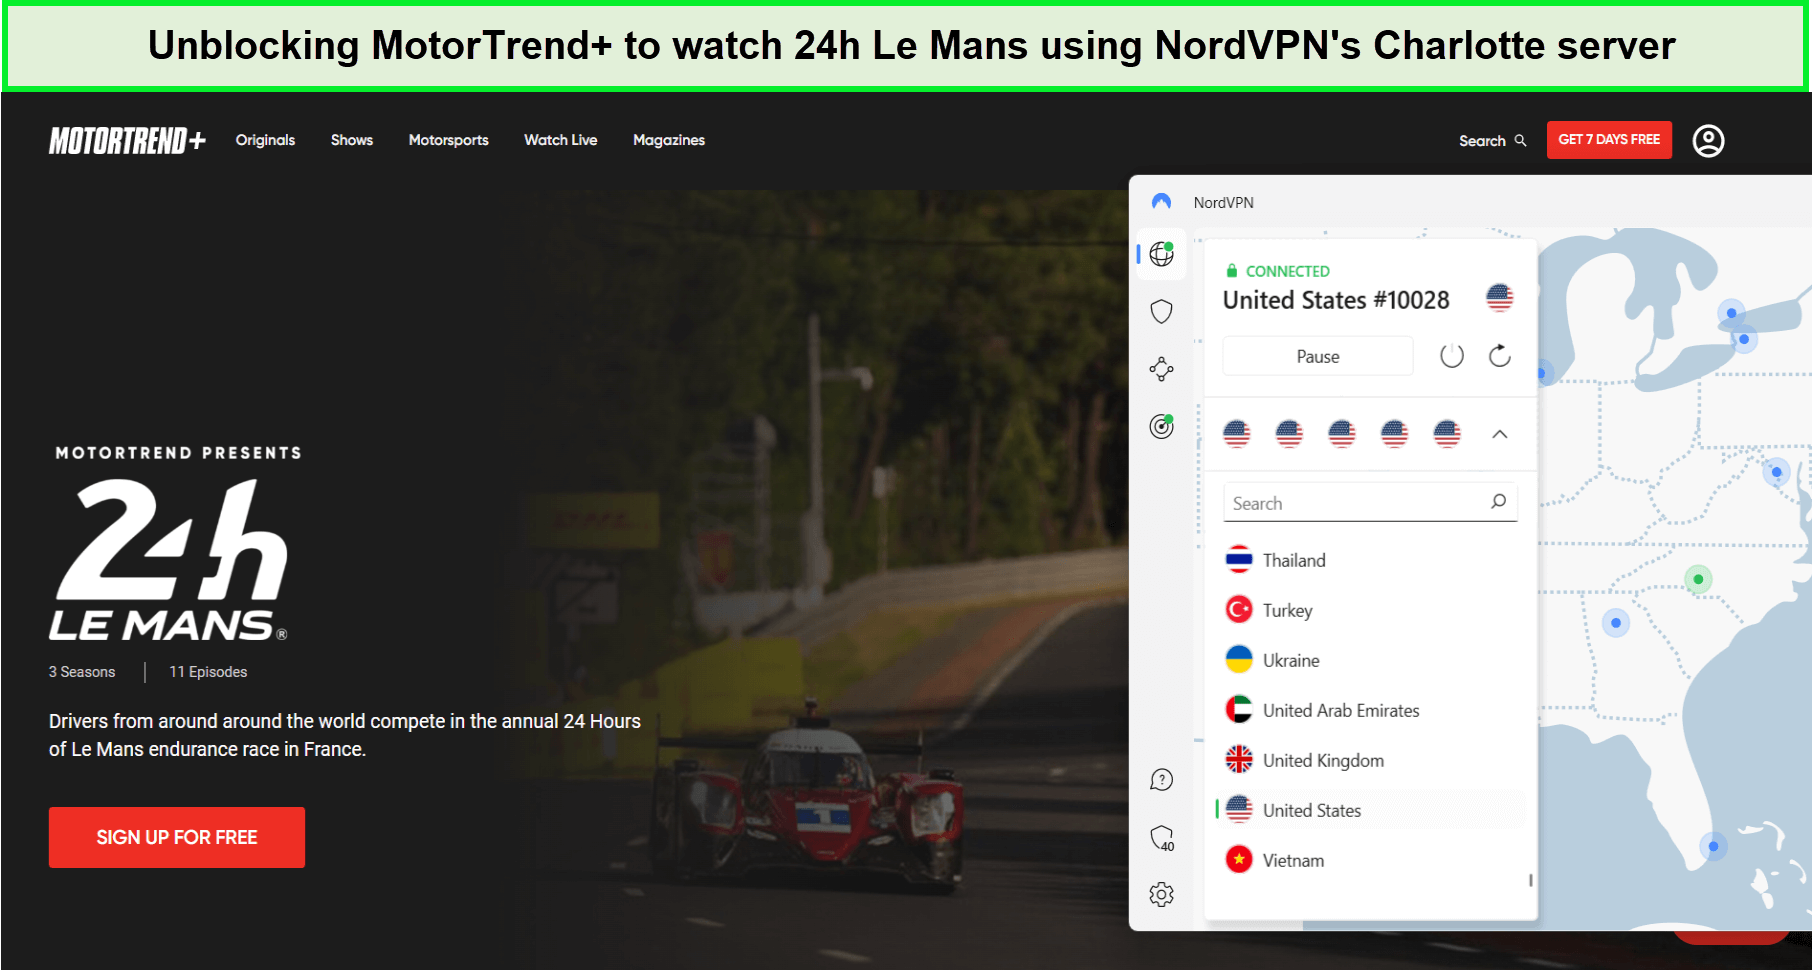 unblocking-motortrend+-to-watch-24h-le-mans-using-nordvpn